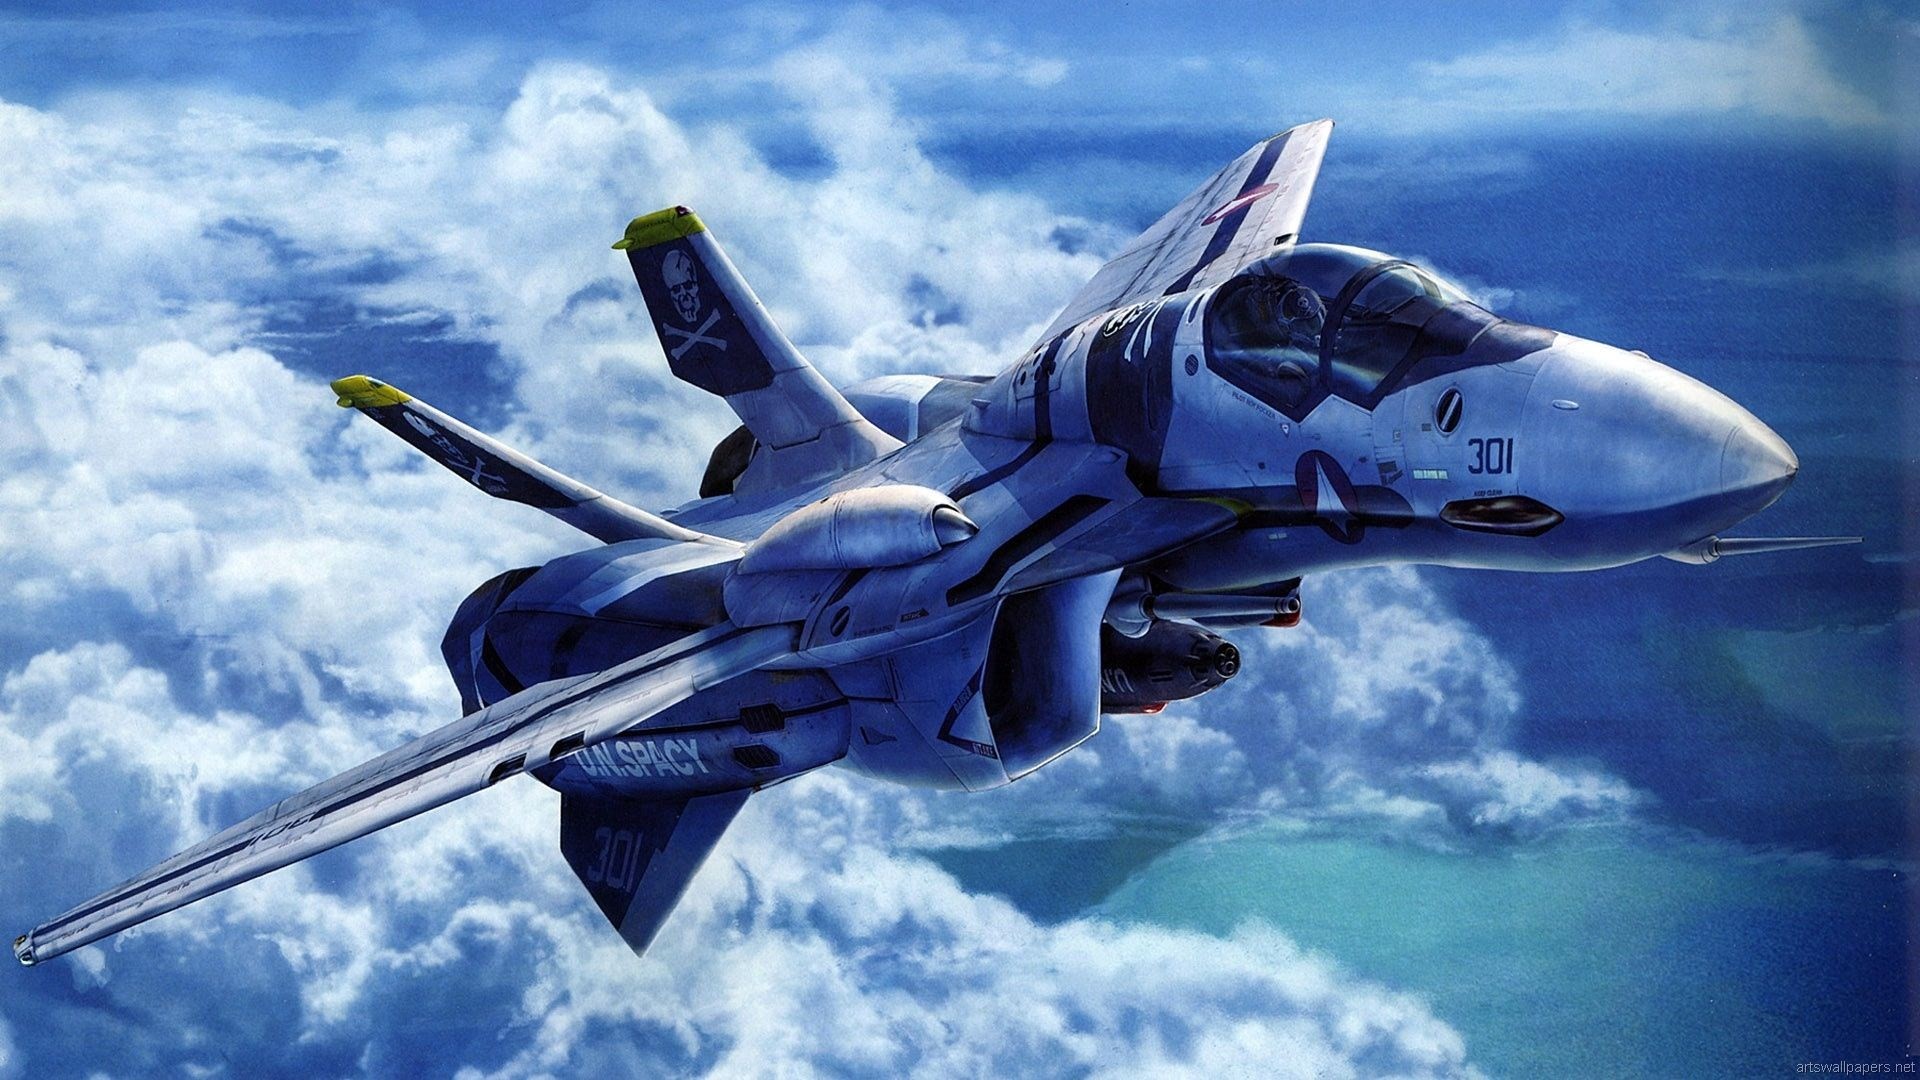 Airplanes Wallpapers, Aircraft, HD Wallpapers, un spacy fighter HD 1920 x 1080